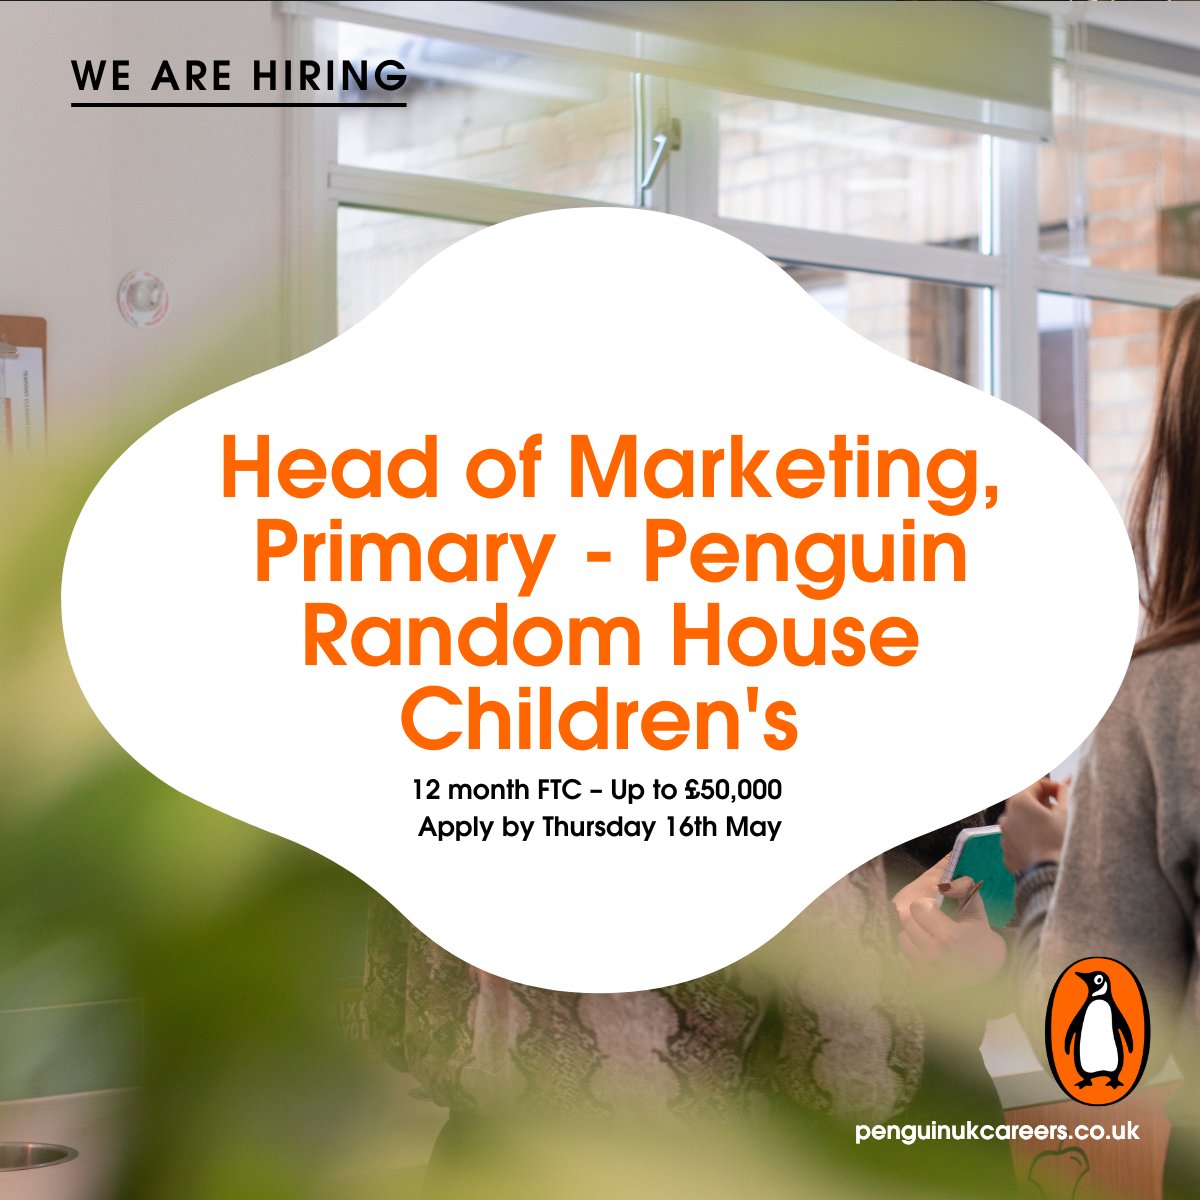 Do you have extensive experience in marketing for children and family audiences? Do you know how to inspire and develop a team of exceptional talent? We have an exciting opportunity to join the Penguin Random House Children’s team Info: shorturl.at/fh468